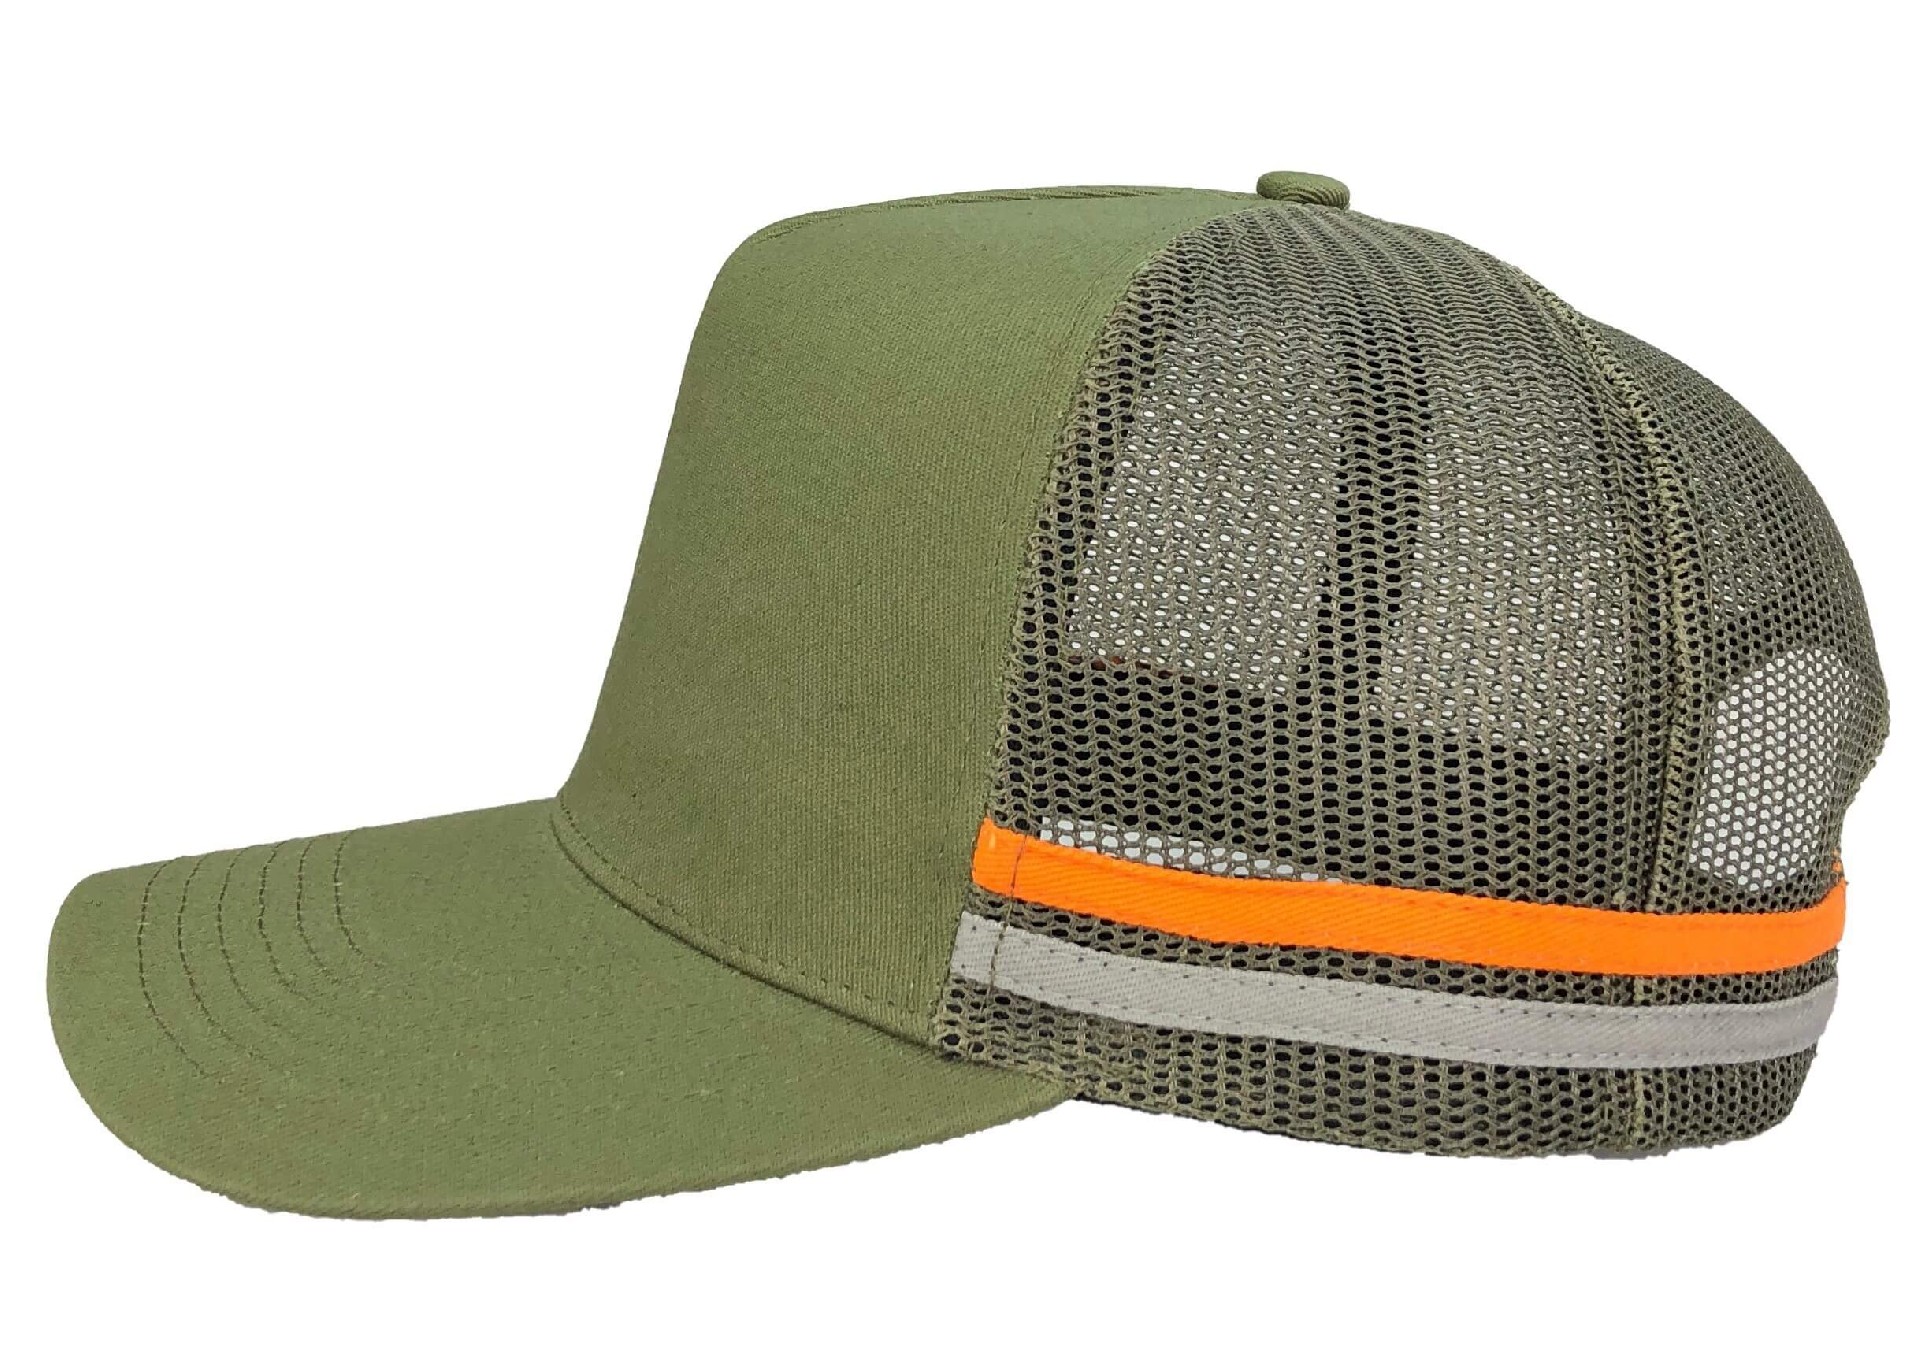 CTC-3018(Hot Selling Australian Country Trucker Caps High Profile 5 Panel 2 Stripes Side Striped Hat Olive Green Trucker Hat)